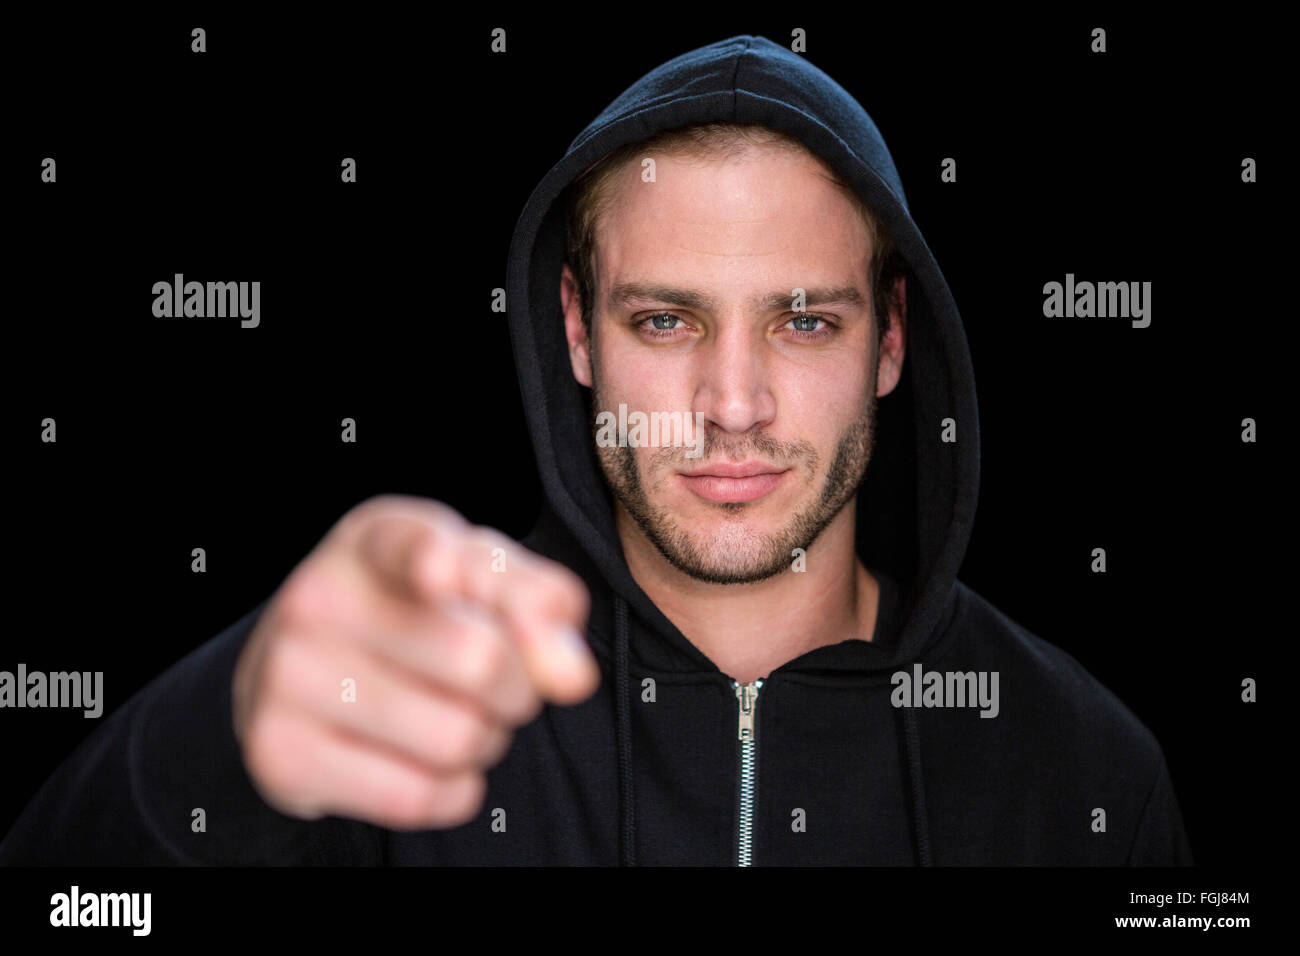 Handsome man wearing a black hoodie Stock Photo